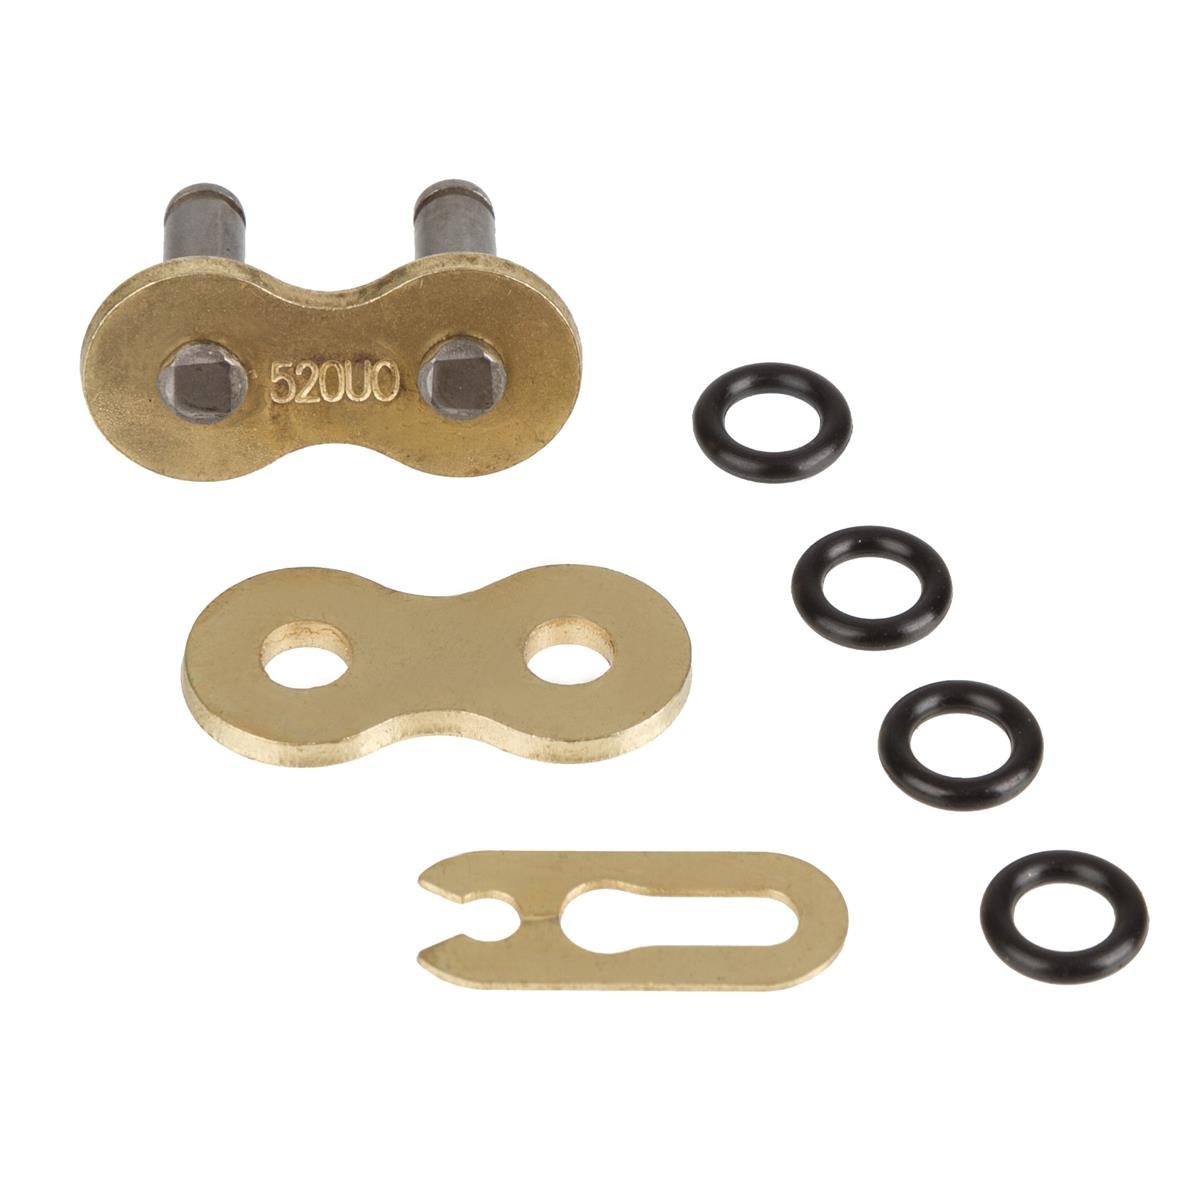 X-Grip Chain lock MR. T for MR. T Chain, O-Ring, Gold